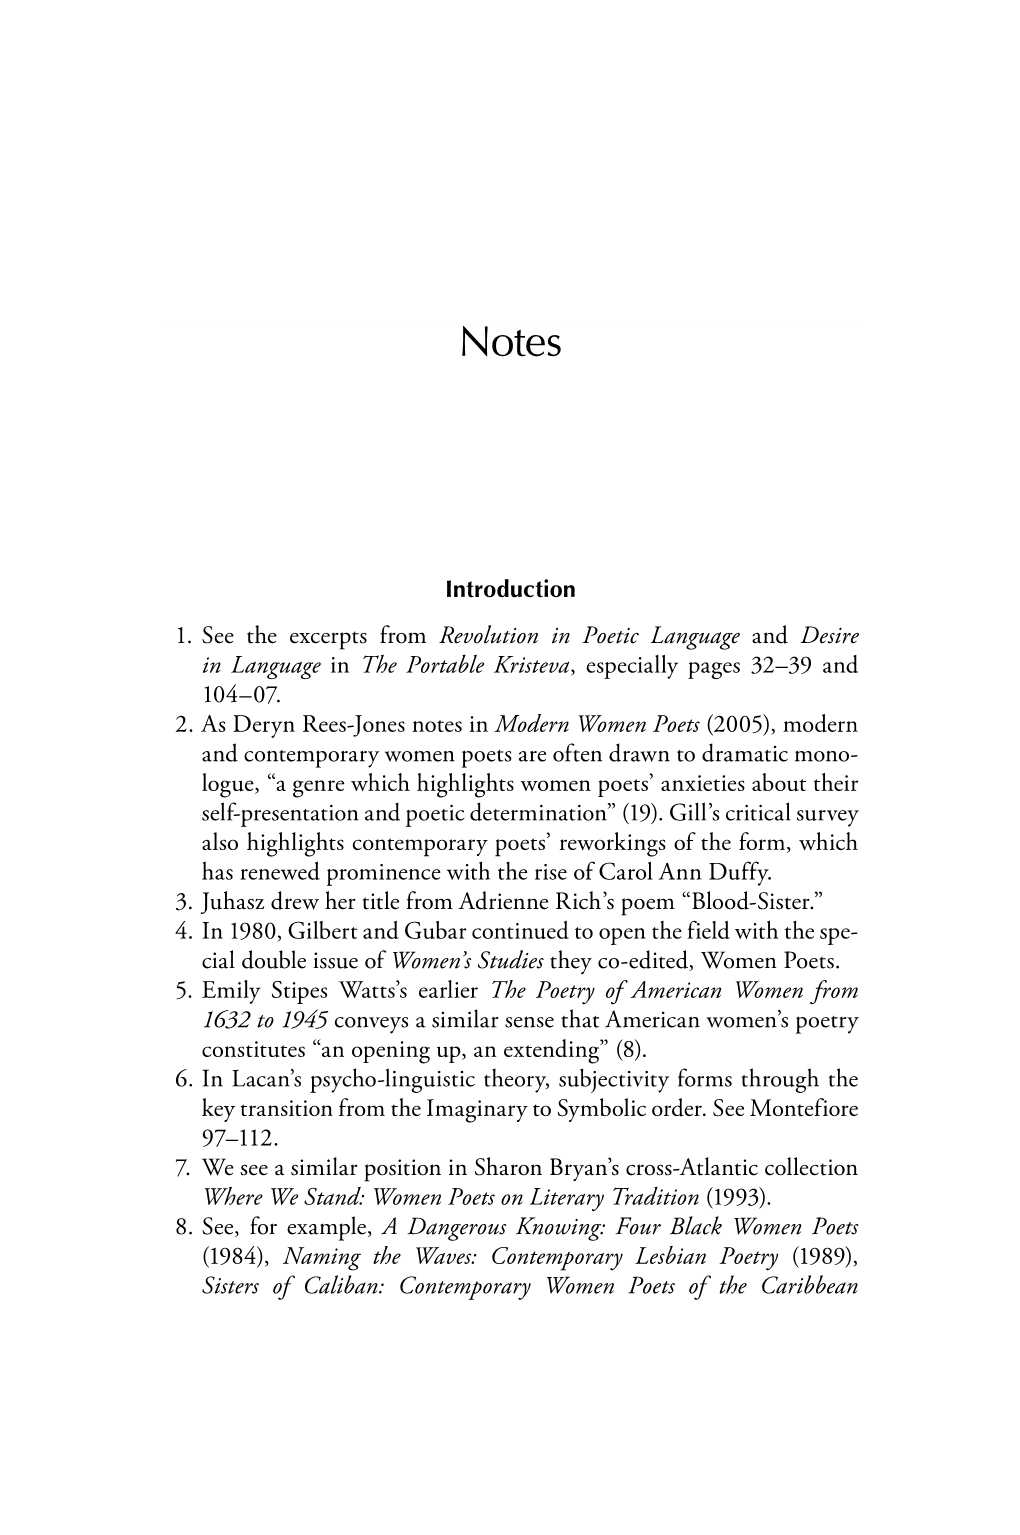 Introduction 1. See the Excerpts from Revolution in Poetic Language and Desire in Language in the Portable Kristeva, Especially Pages 32–39 and 104–07